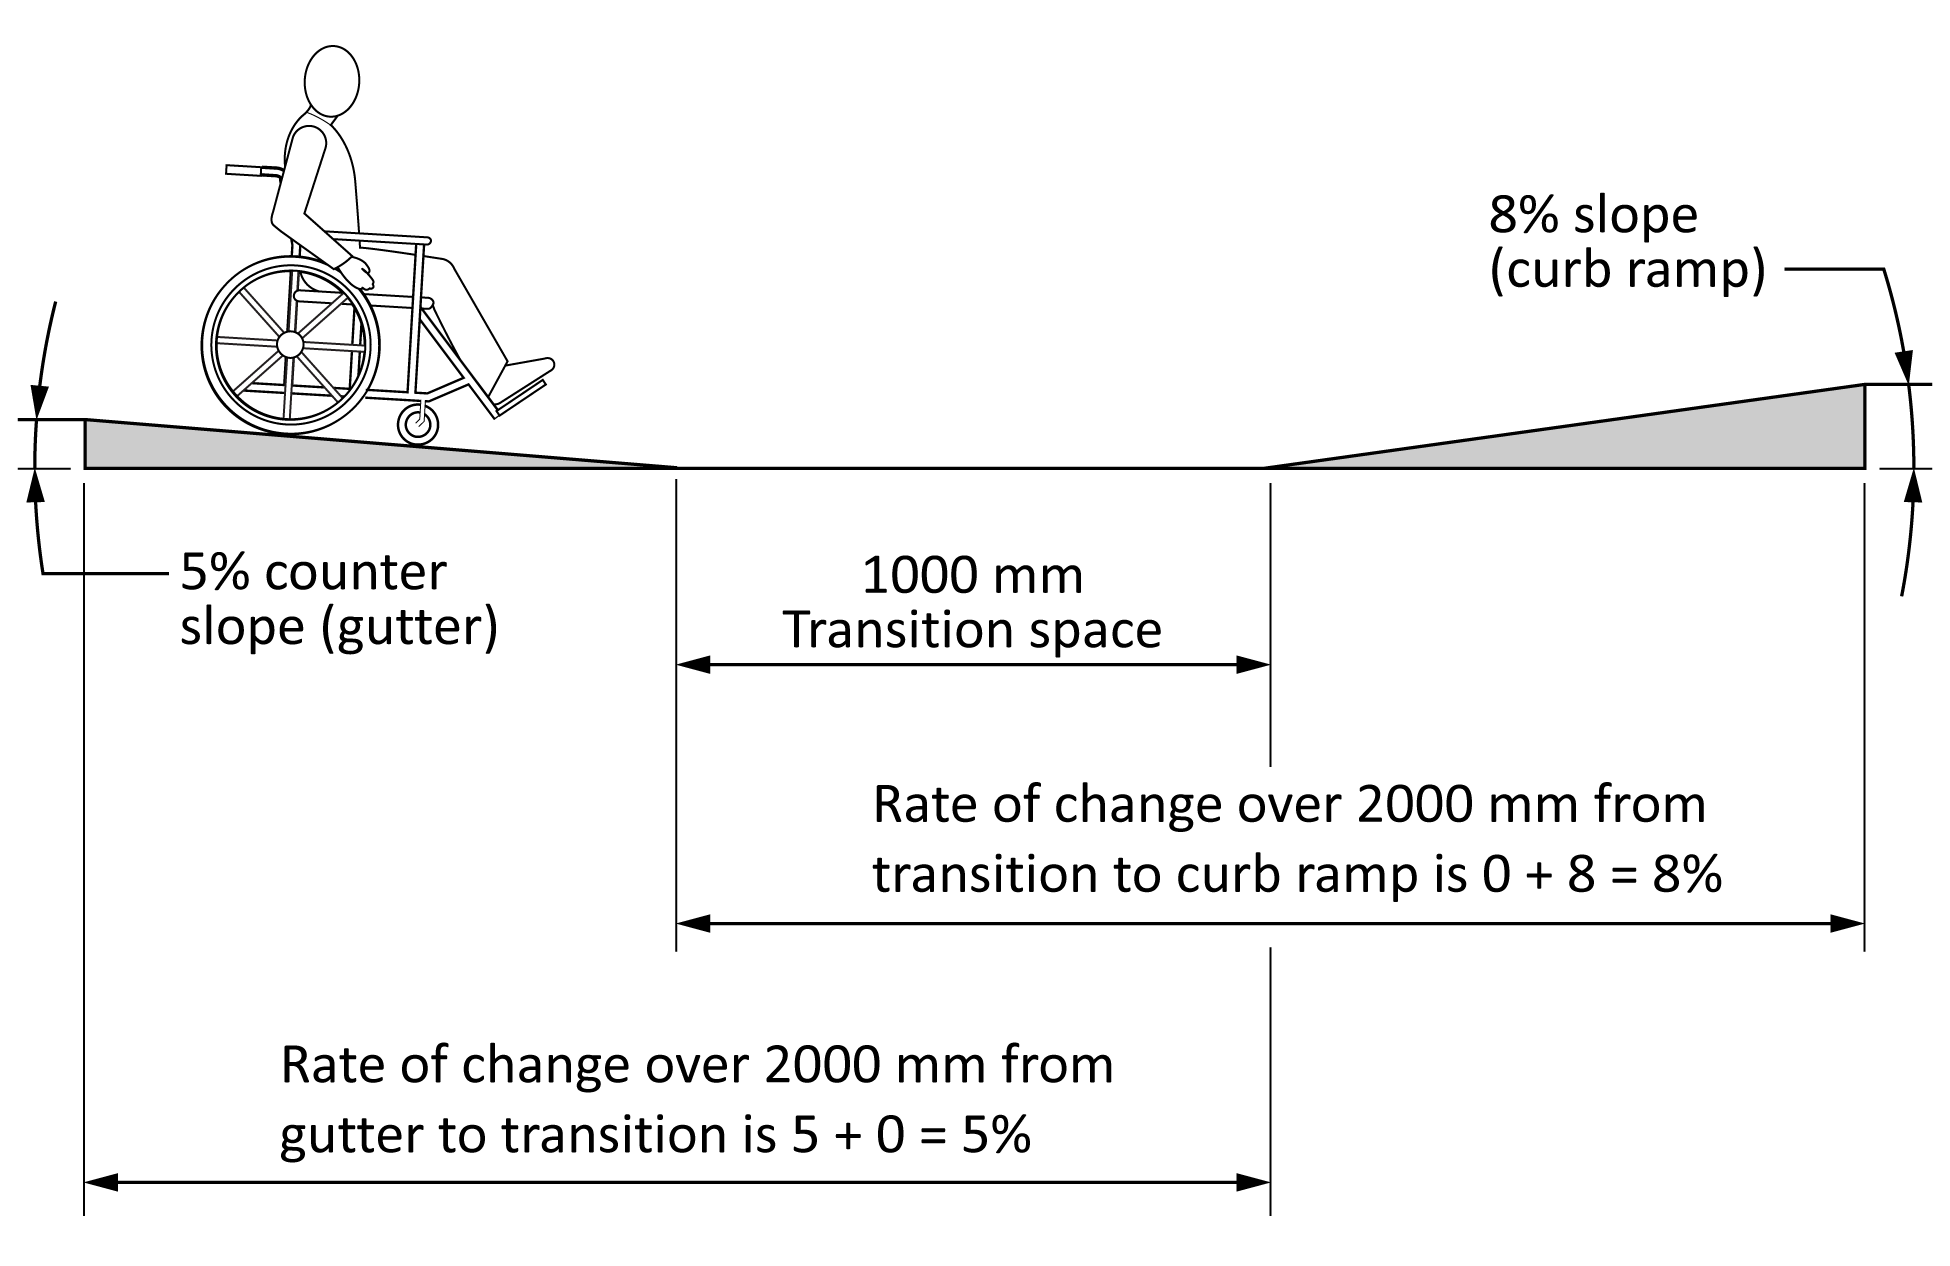 This figure shows a person in a wheelchair descending a slope of 5% and approaching a level transition space before ascending a third part of the pathway with an 8% slope. 